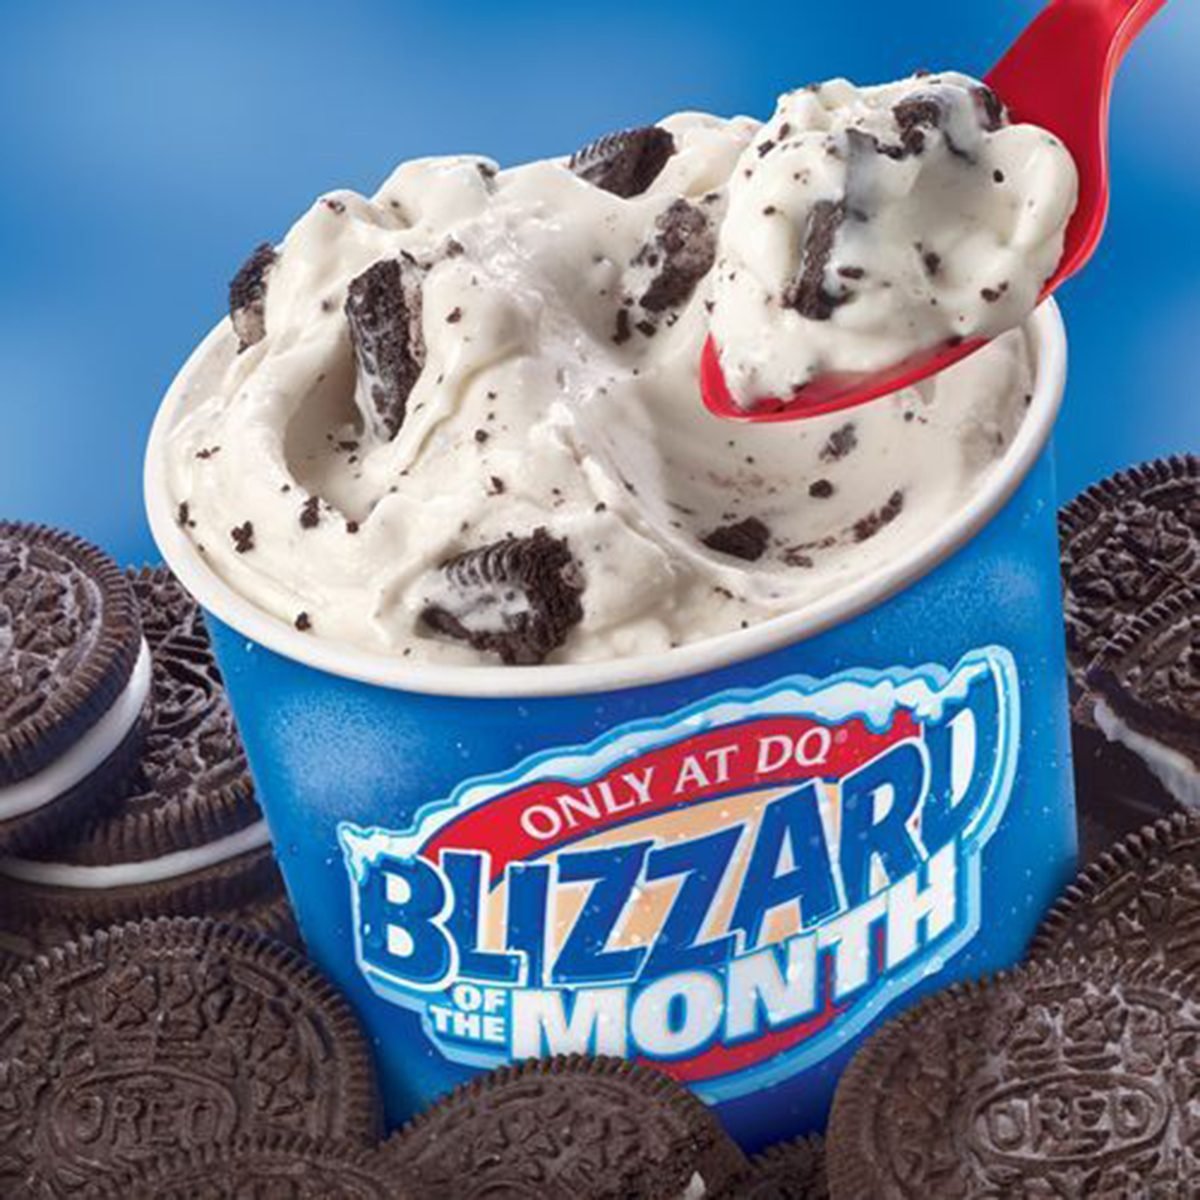 8 Things You Probably Never Knew About the Dairy Queen Blizzard